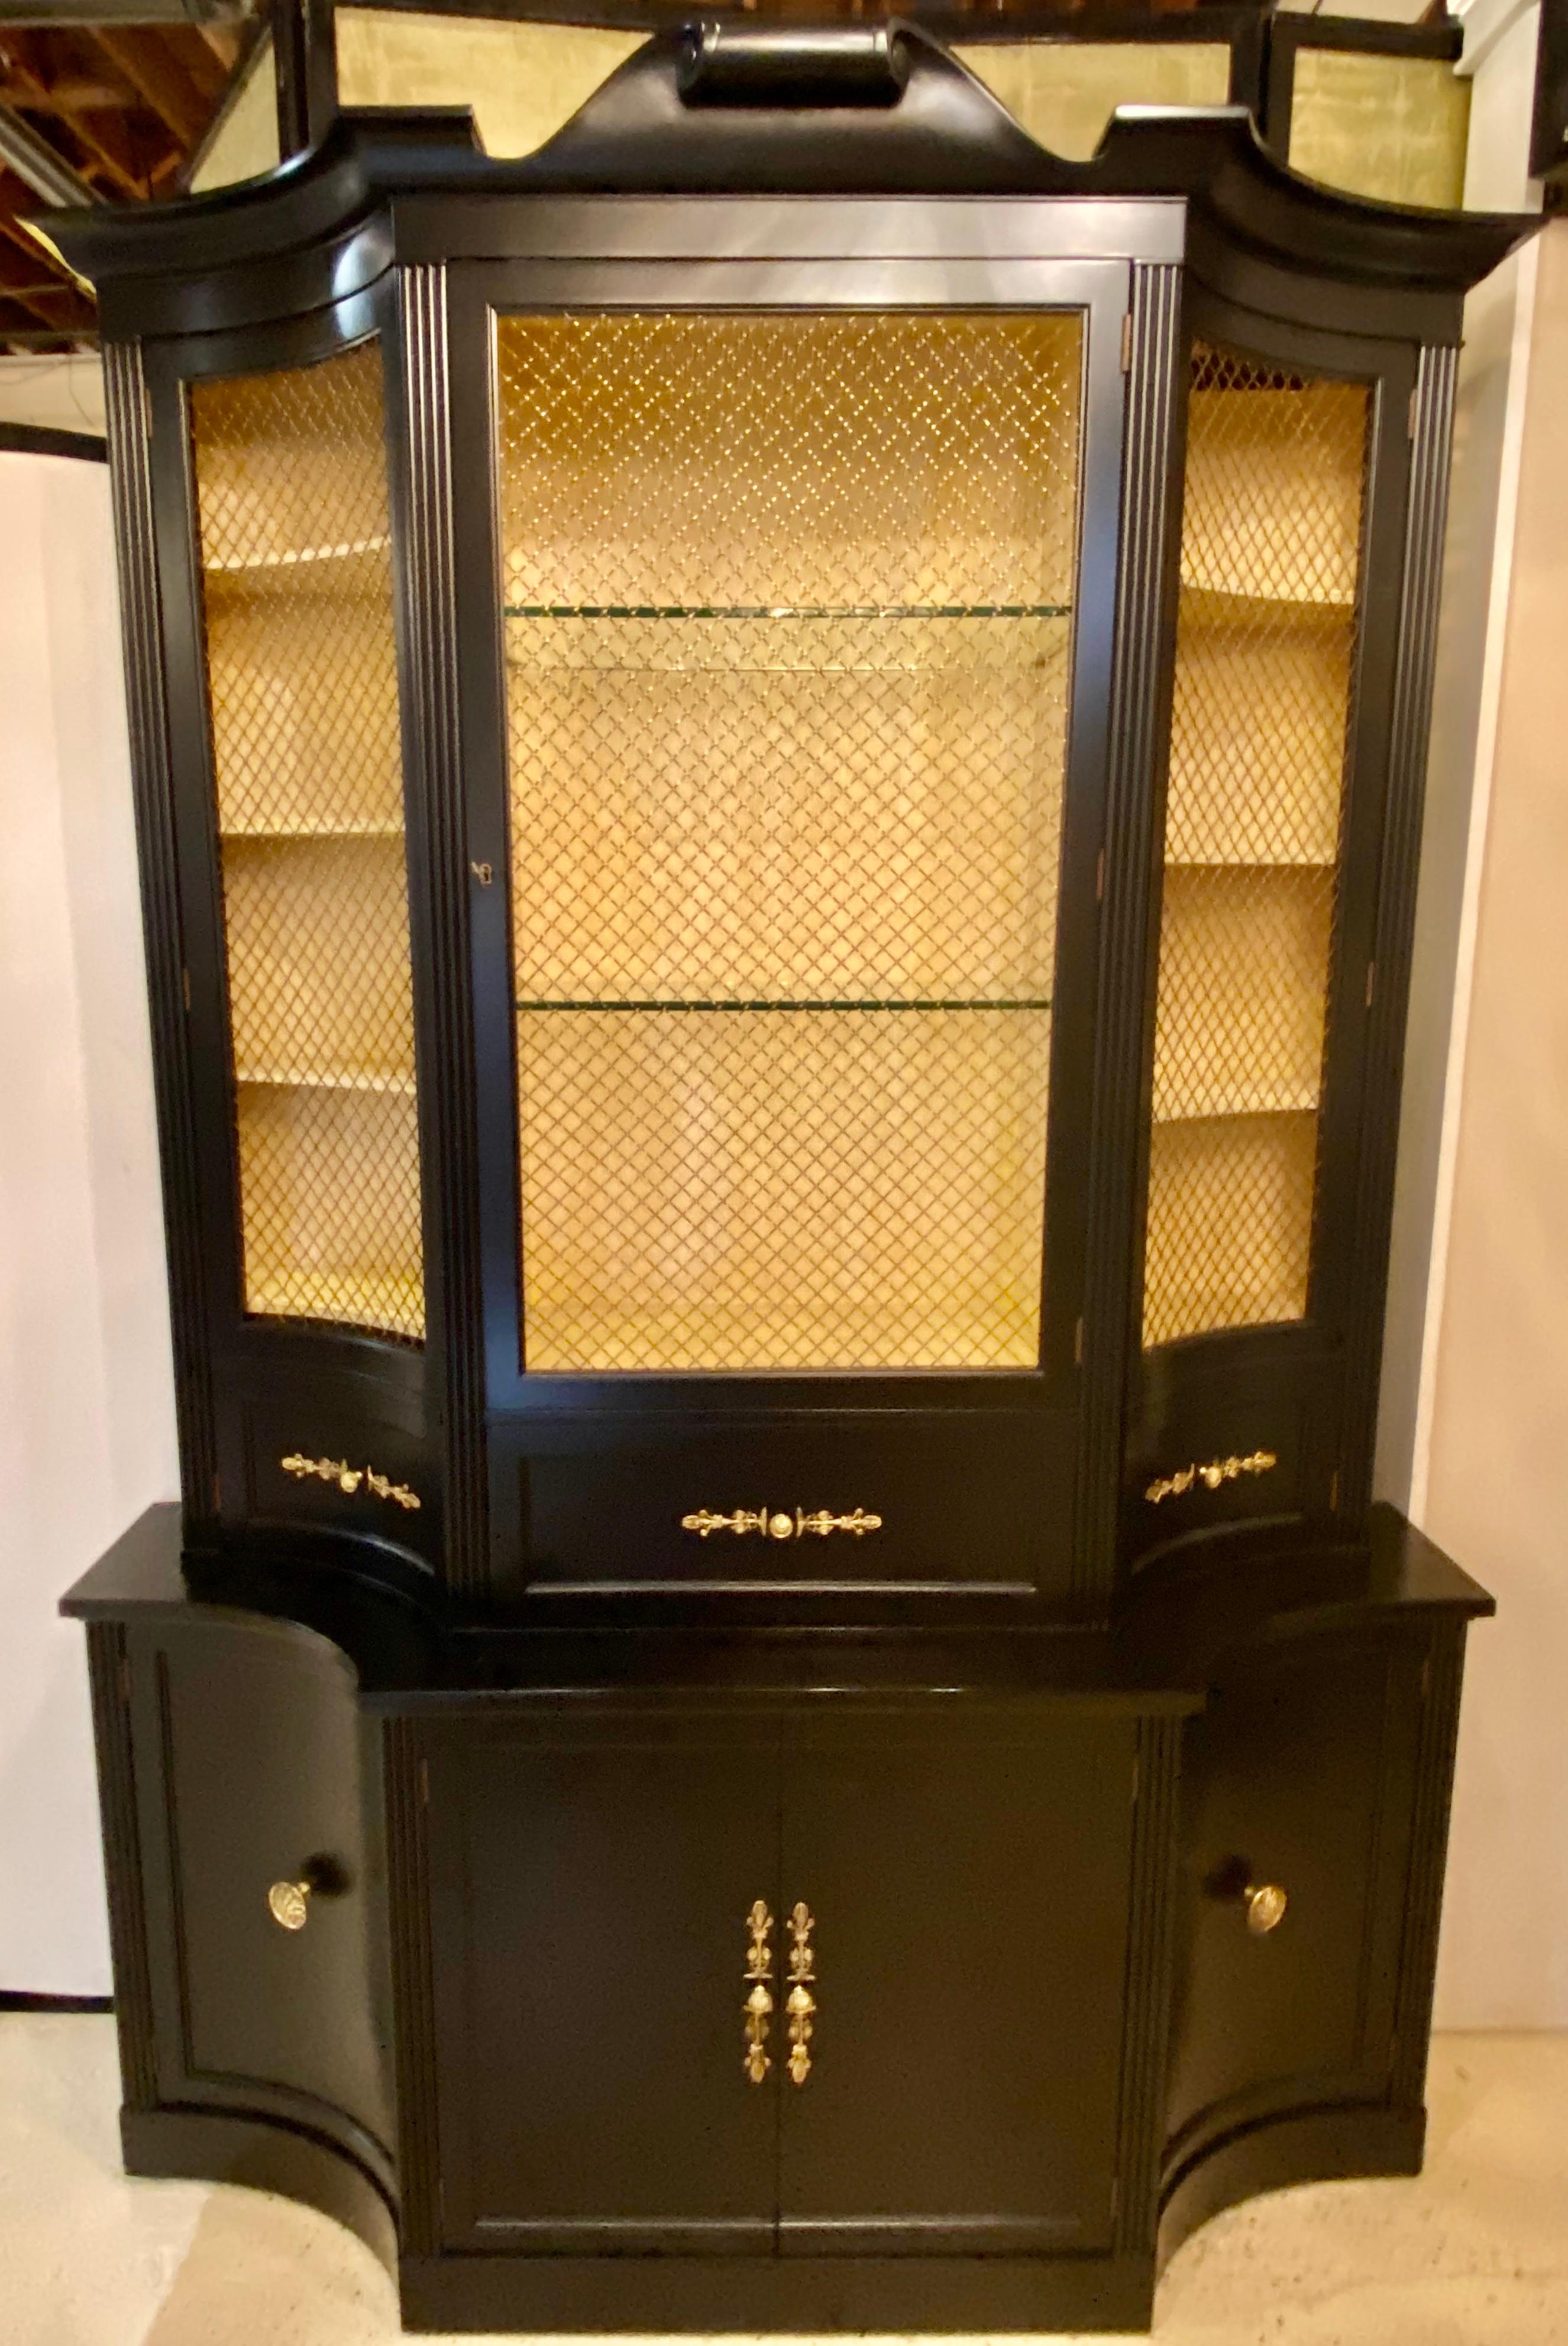 Hollywood Regency Parzinger style cabinet breakfront. Ebony and glass lighted. This fine ebony fully refinished cabinet need only have the interior light rewired. The sideboard, server base having concave sides with double front doors all with